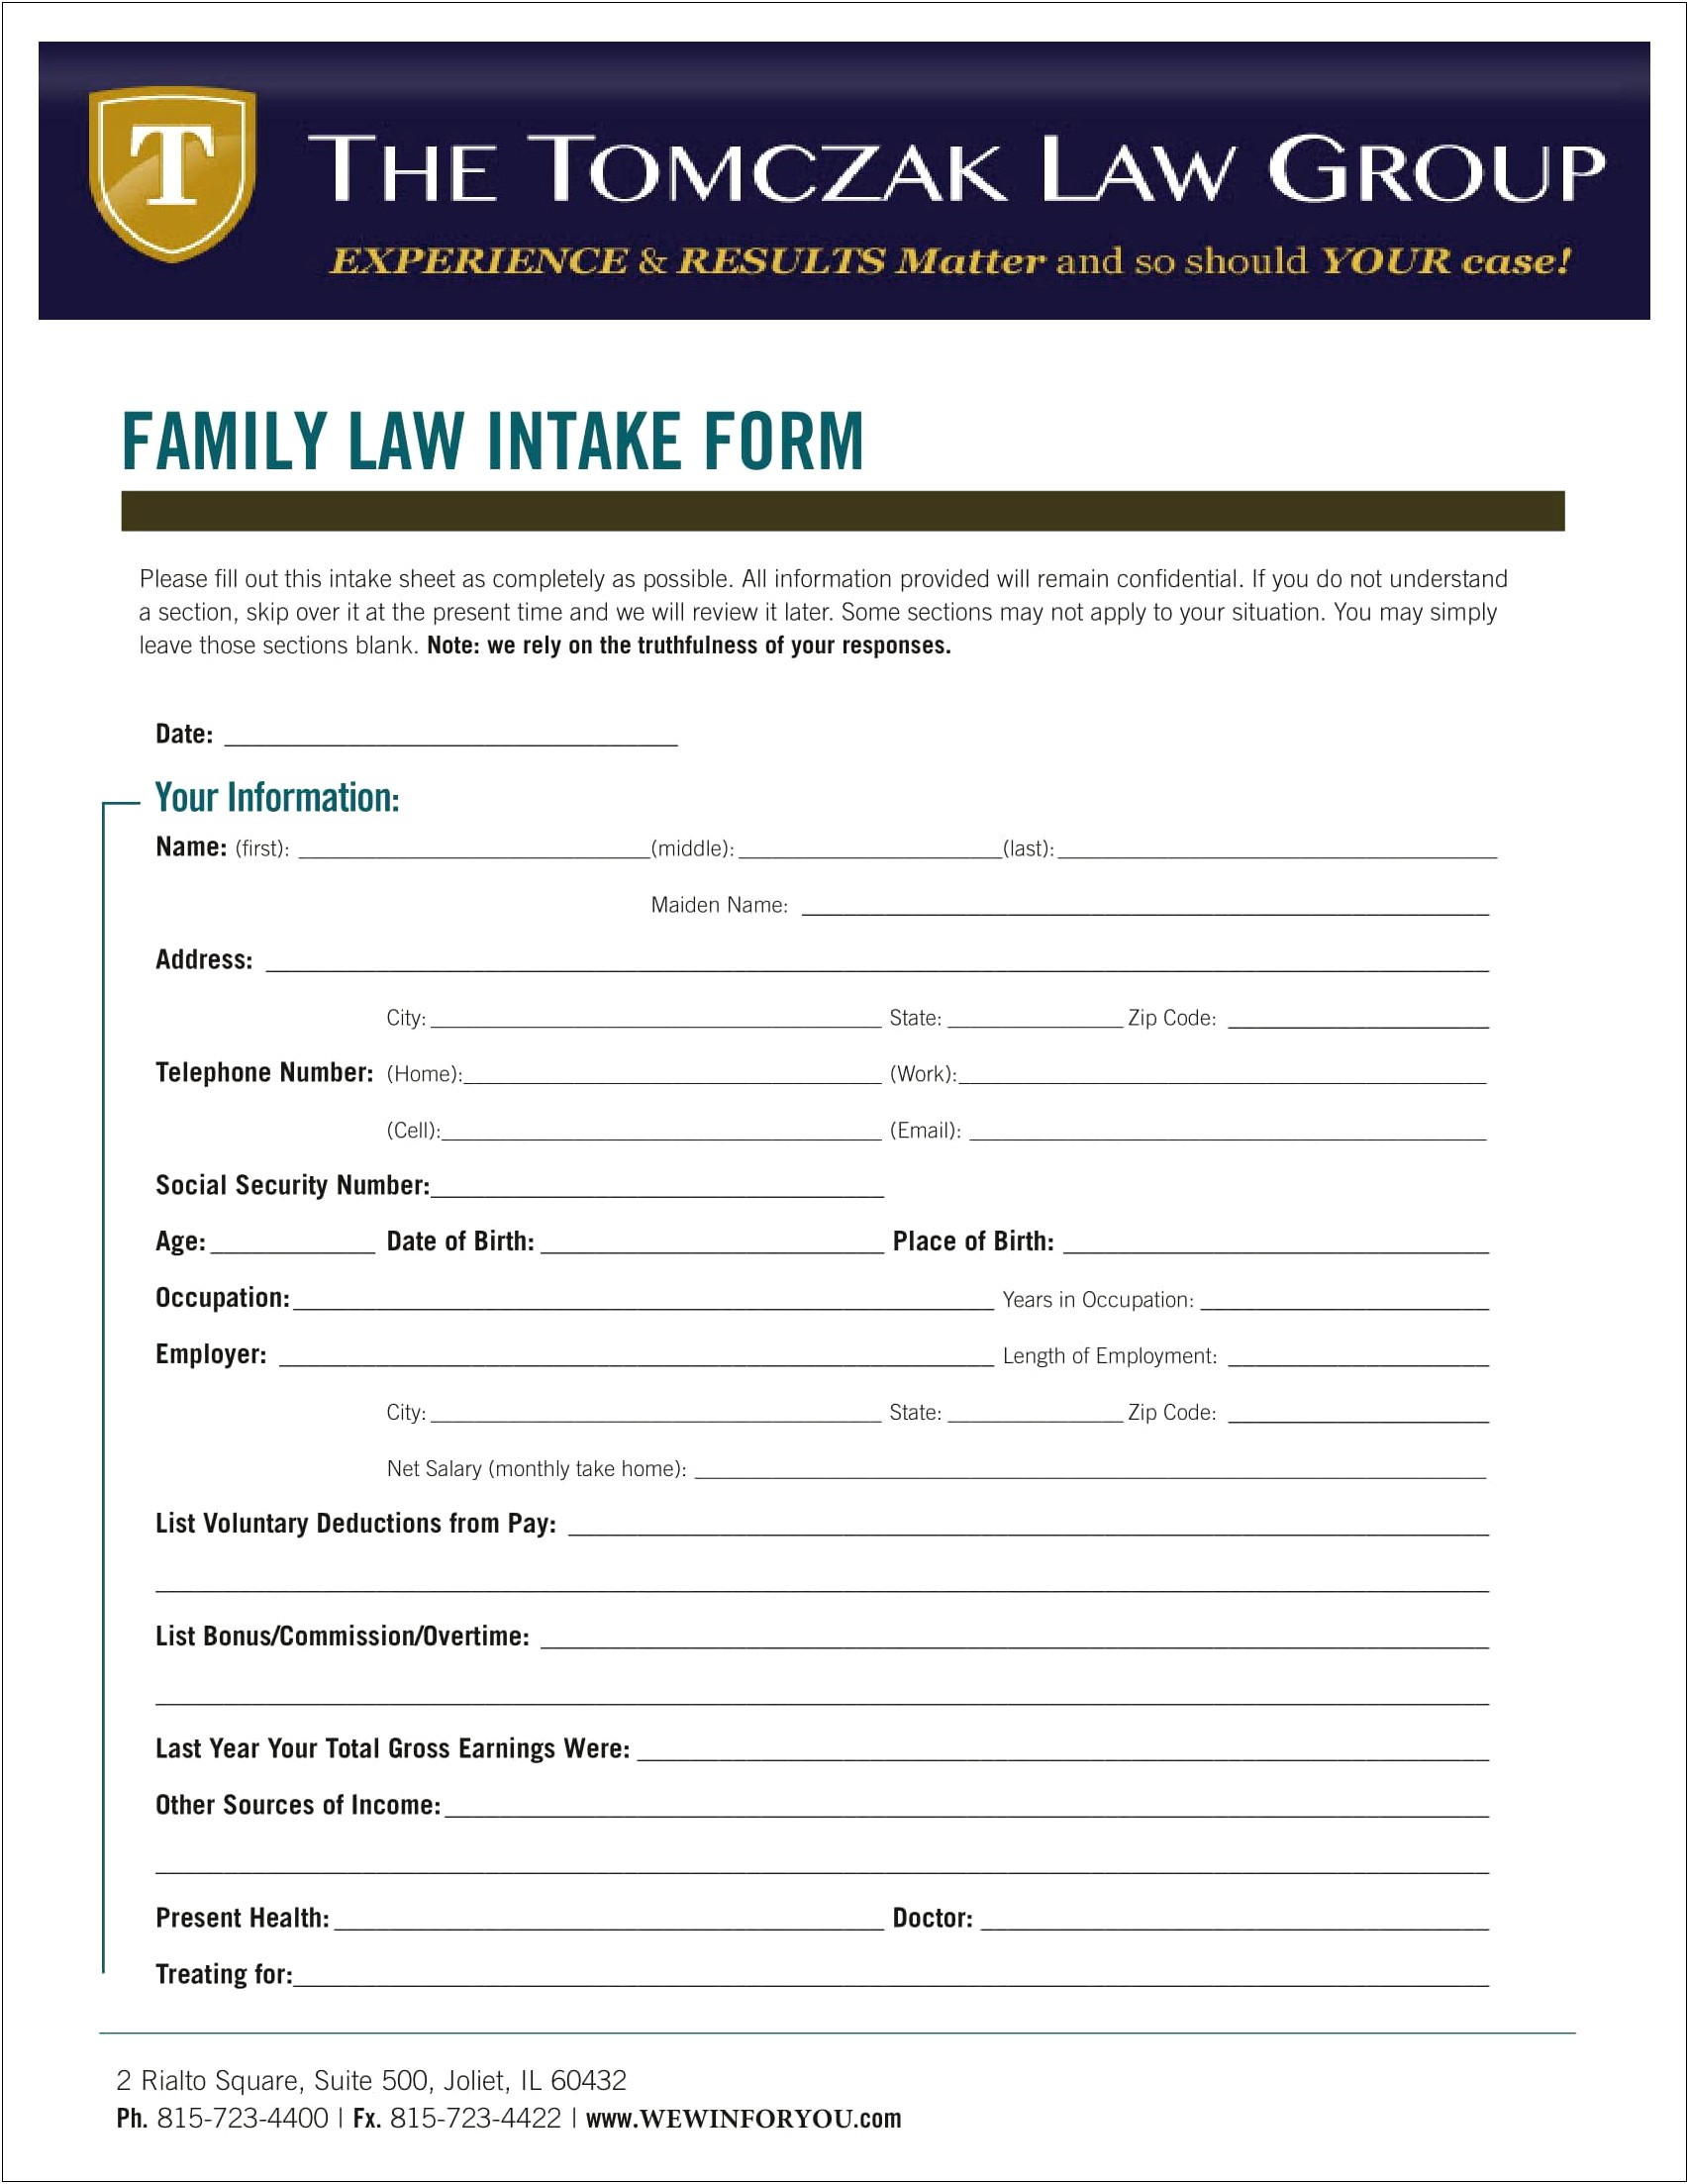 Family Law Client Intake Form Template Download